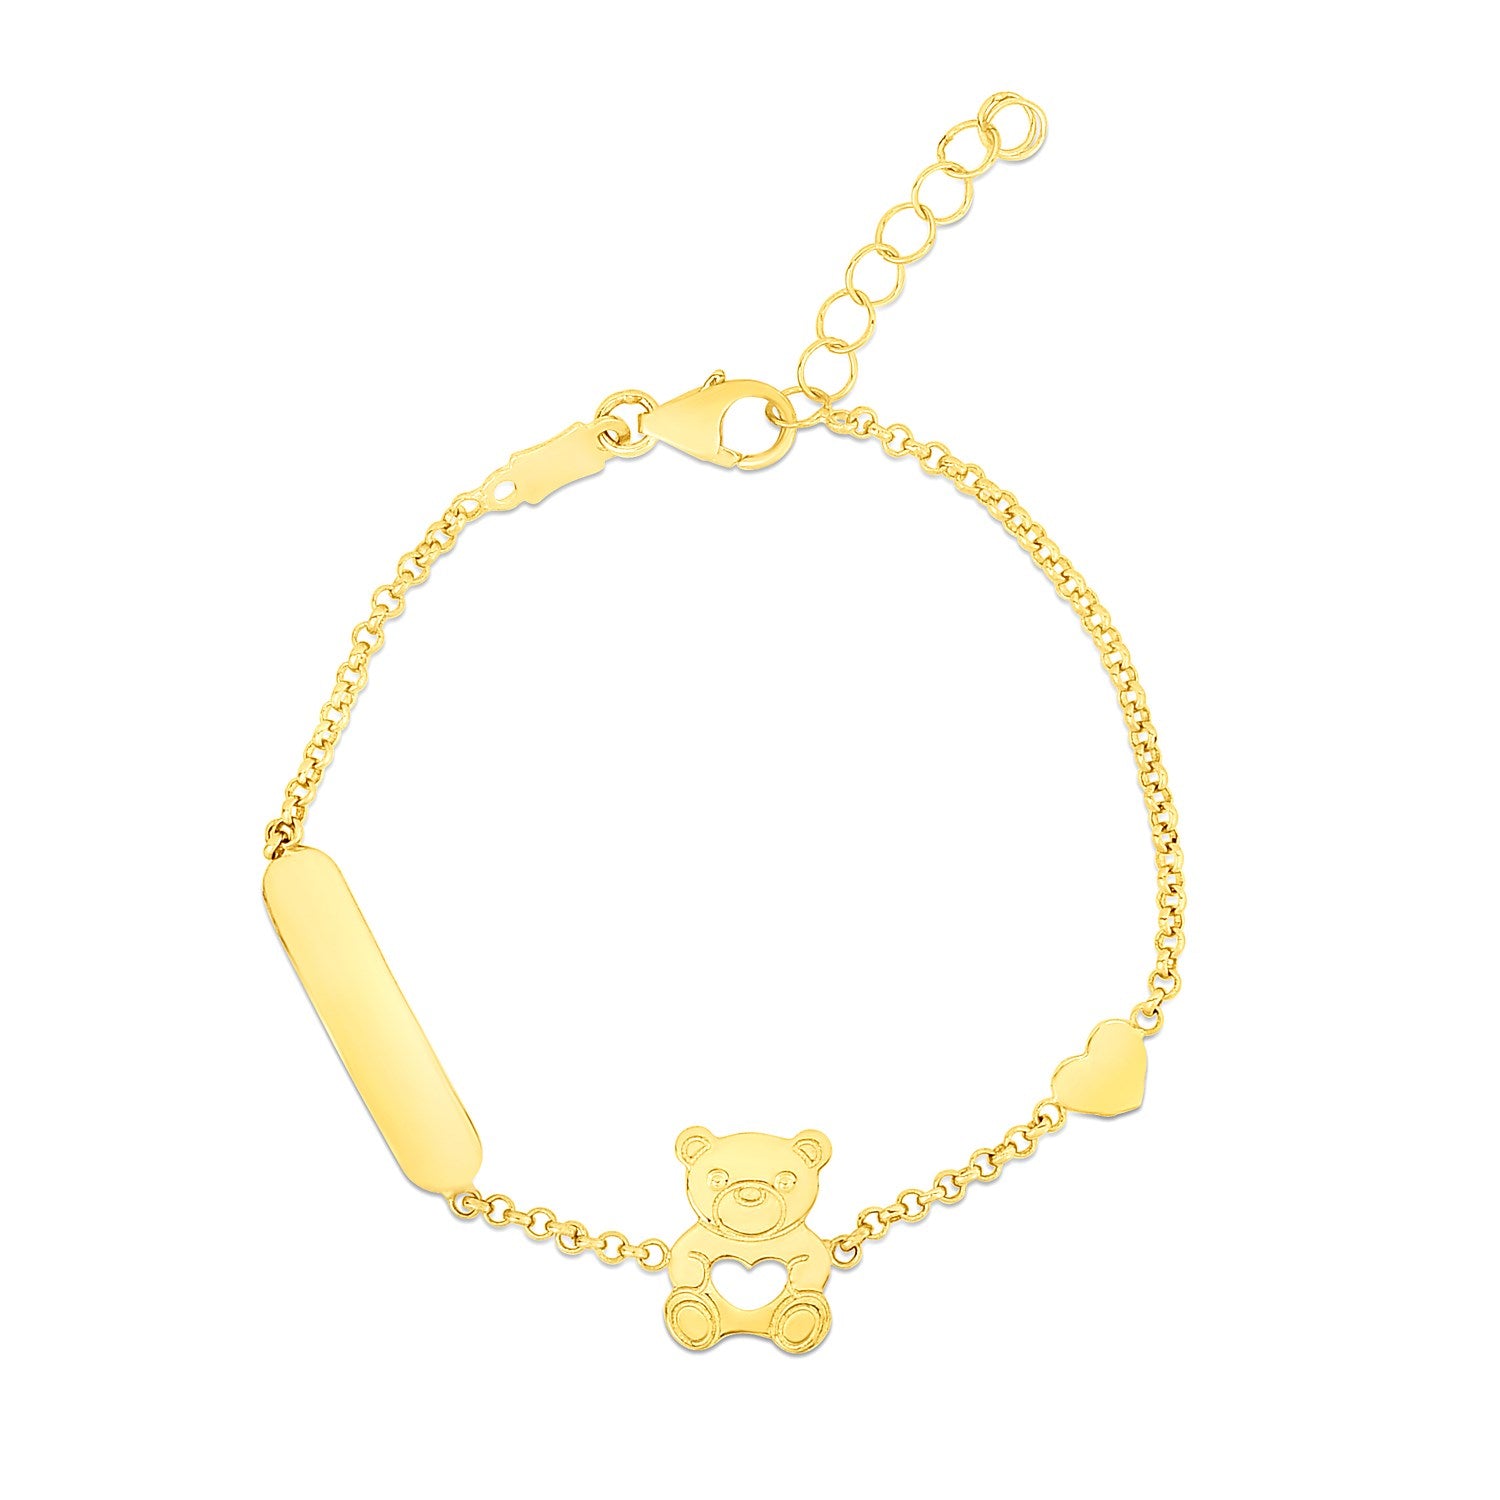 14k Yellow Gold Childrens Bracelet with Teddy Bear Heart and Bar